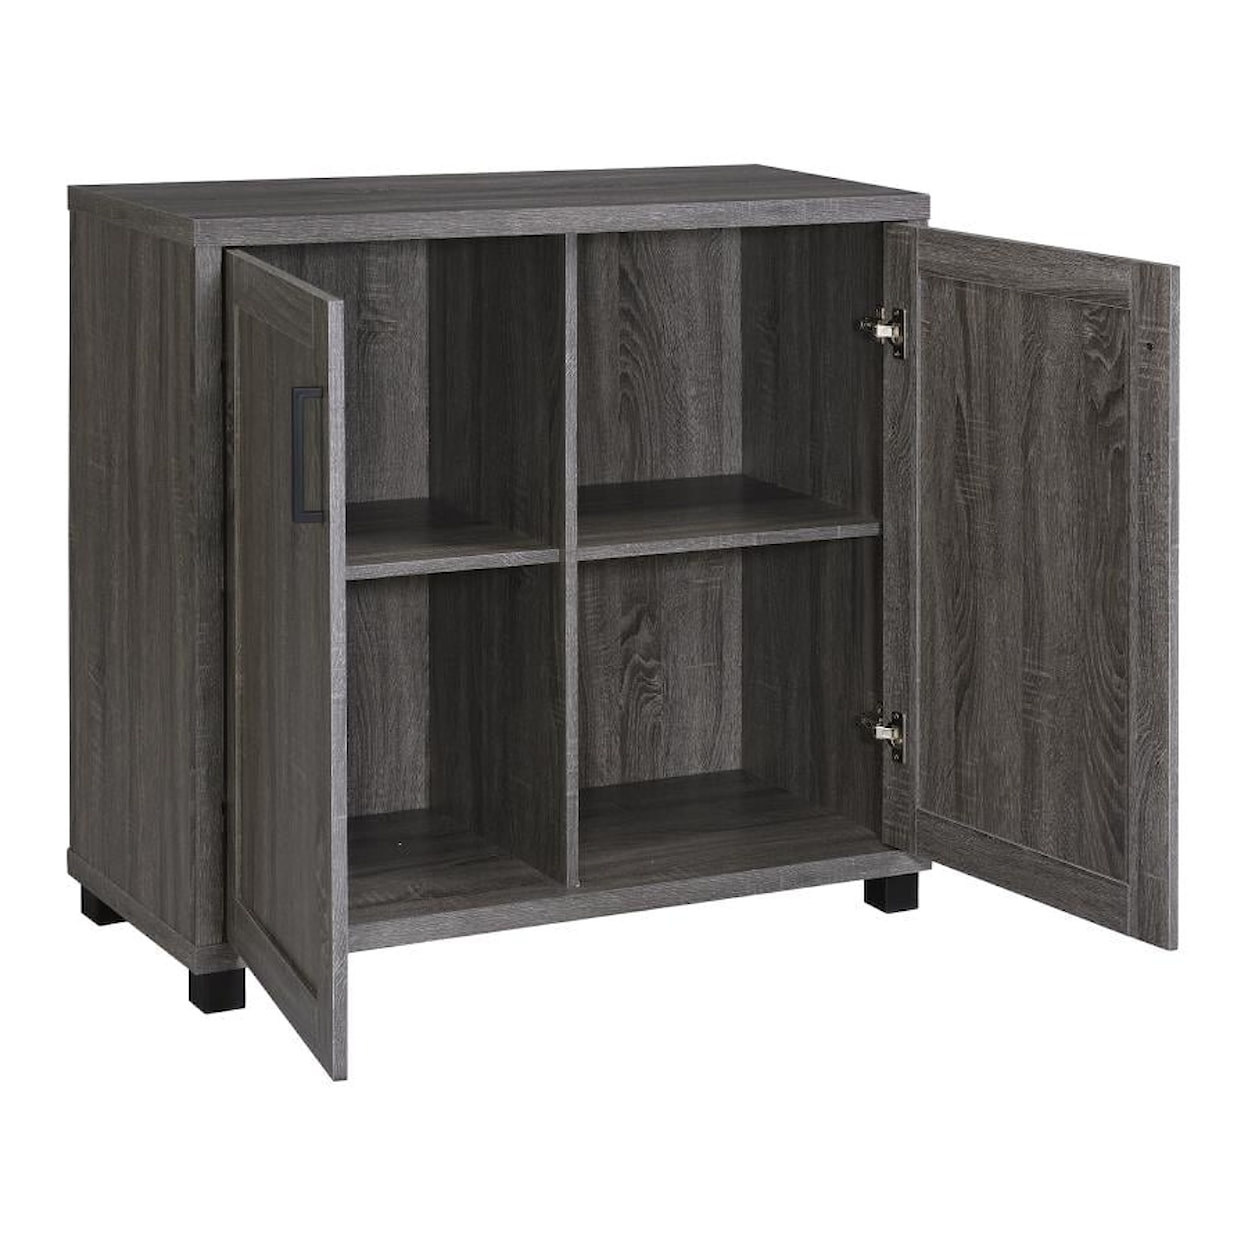 Coaster Storage and Display Furniture BRANDELL GREY SHORT ACCENT | CABINET